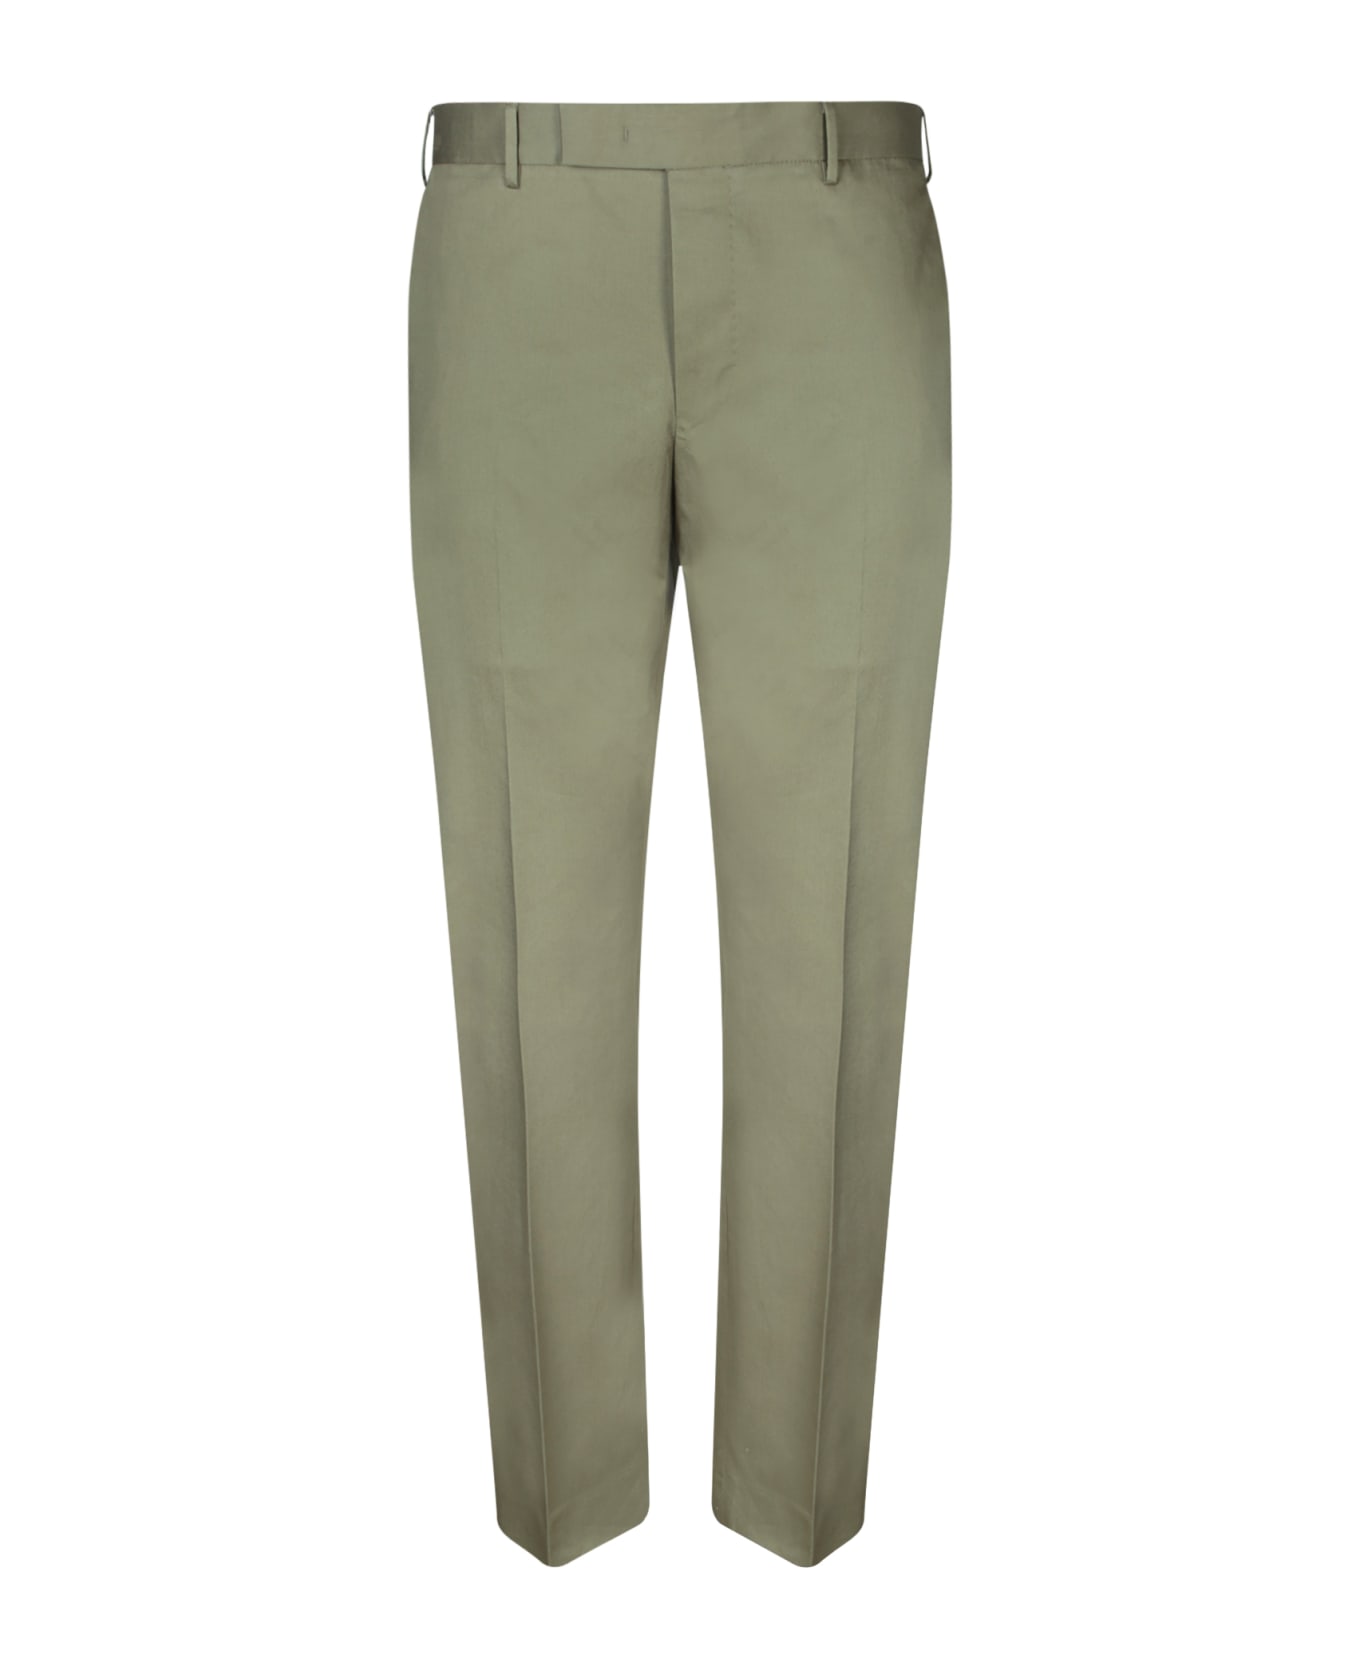 PT01 Dieci Military Green Trousers - Green